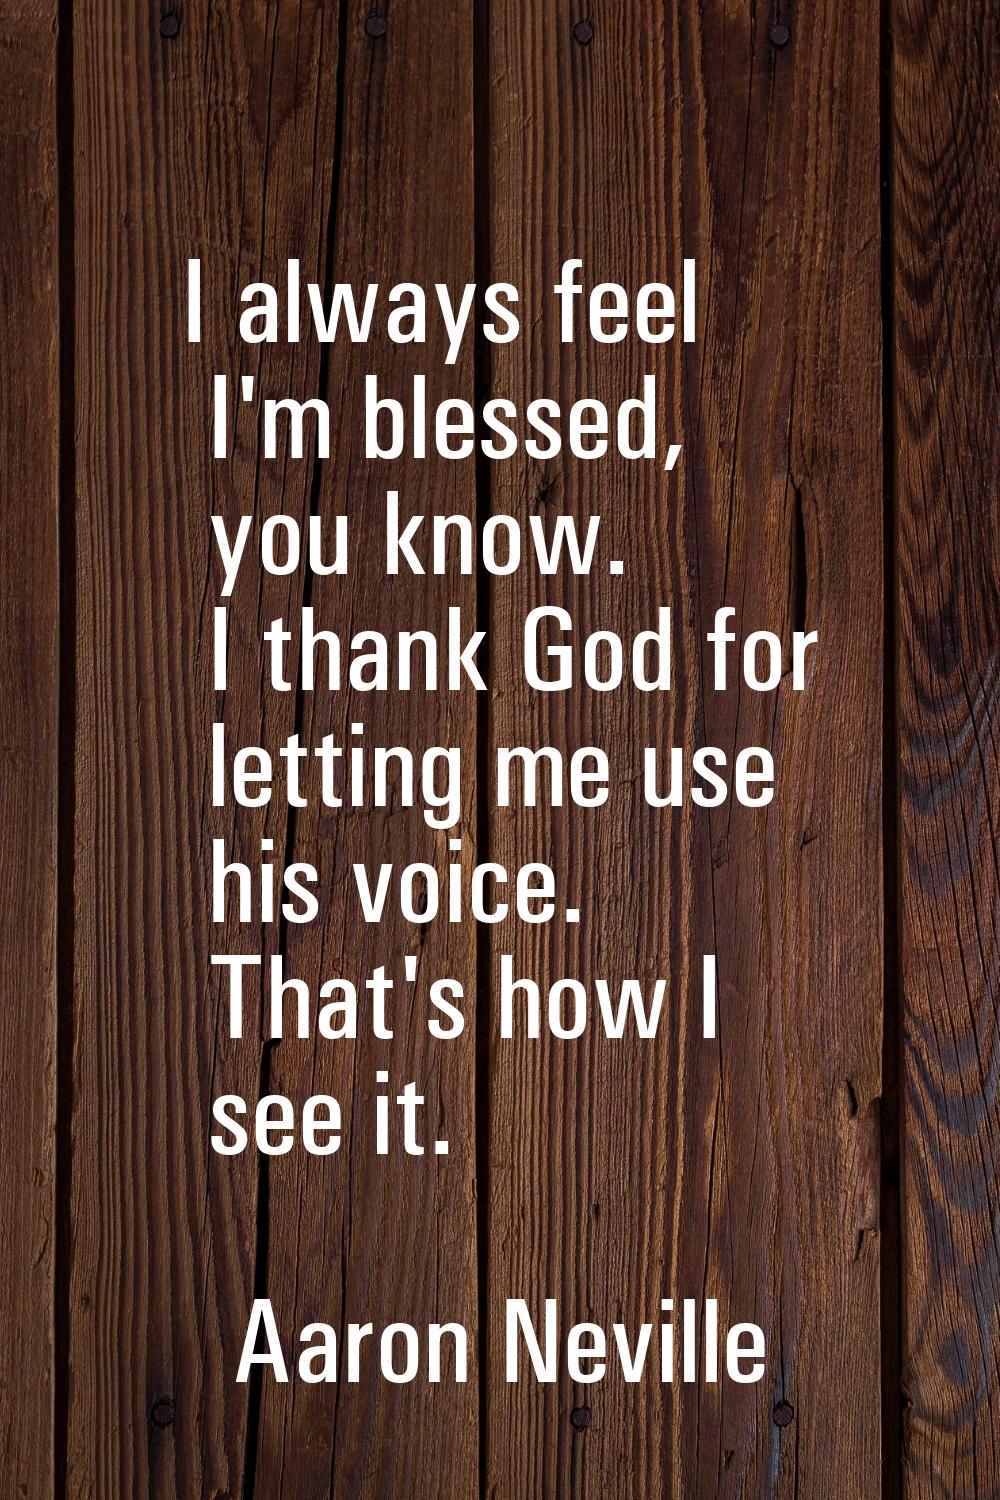 I always feel I'm blessed, you know. I thank God for letting me use his voice. That's how I see it.